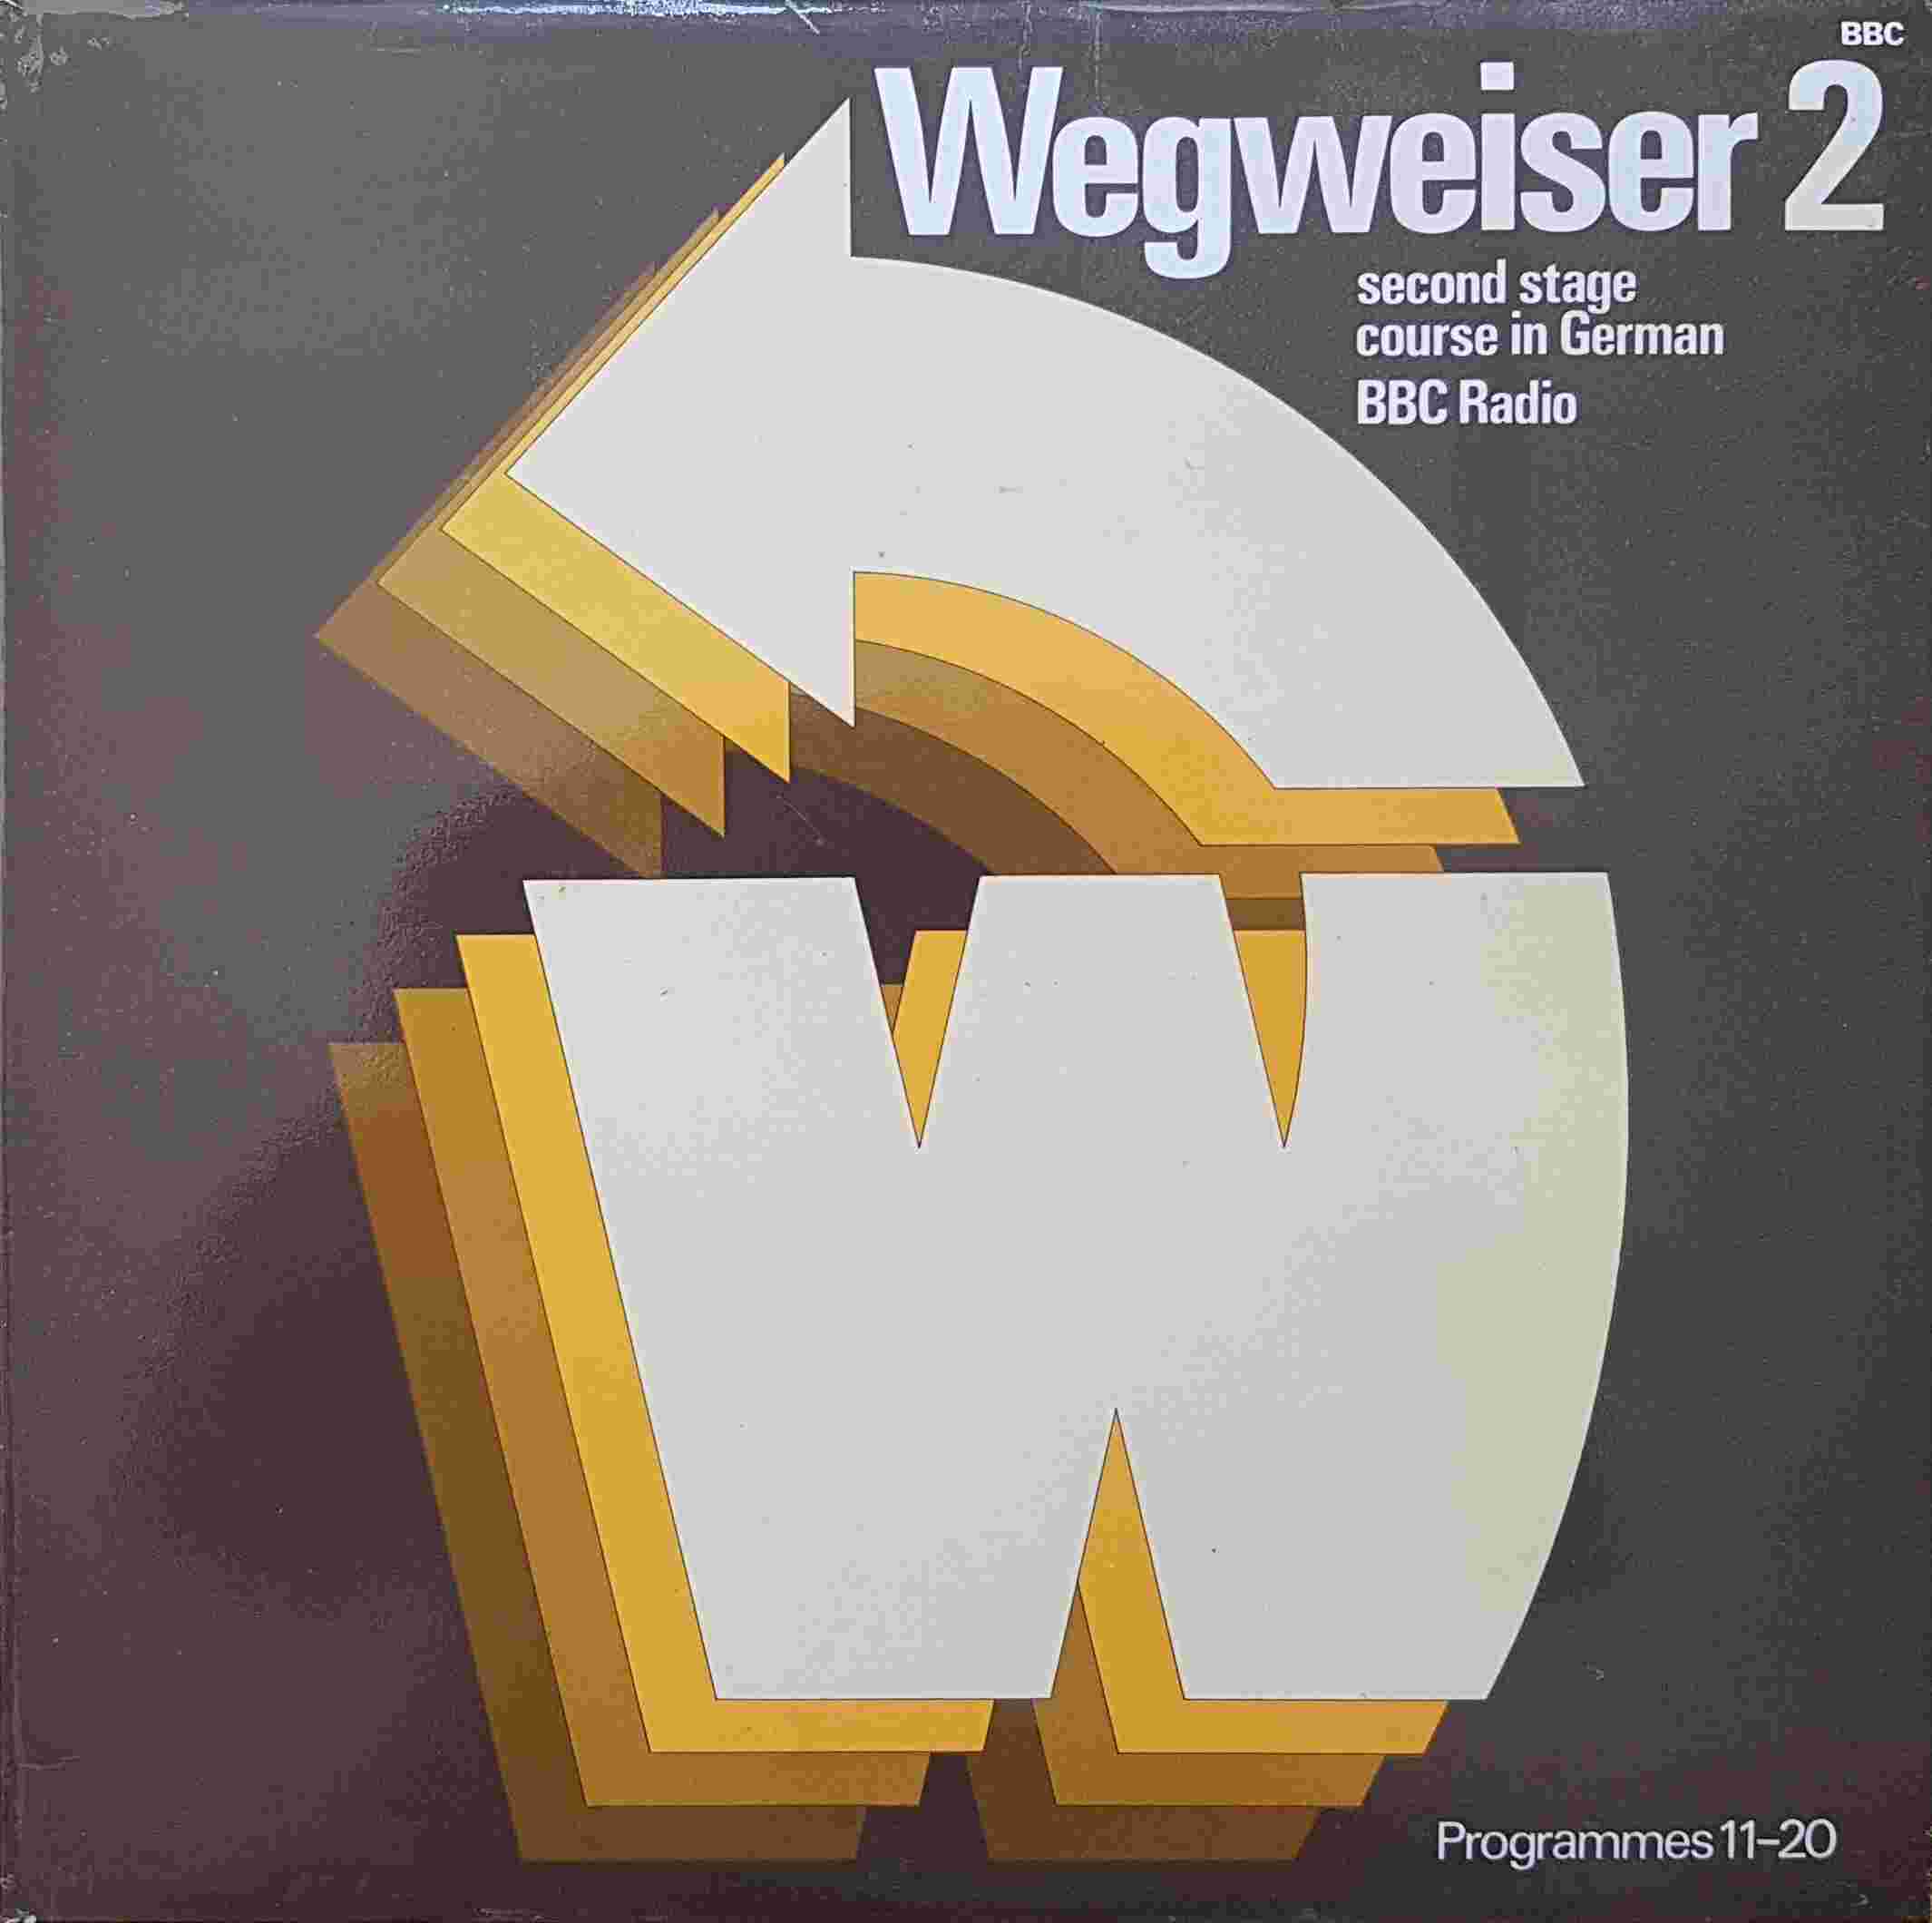 Picture of OP 219 Wegweiser 2 - Second stage course in German - Programmes 11 - 20 by artist Antony Peck from the BBC albums - Records and Tapes library